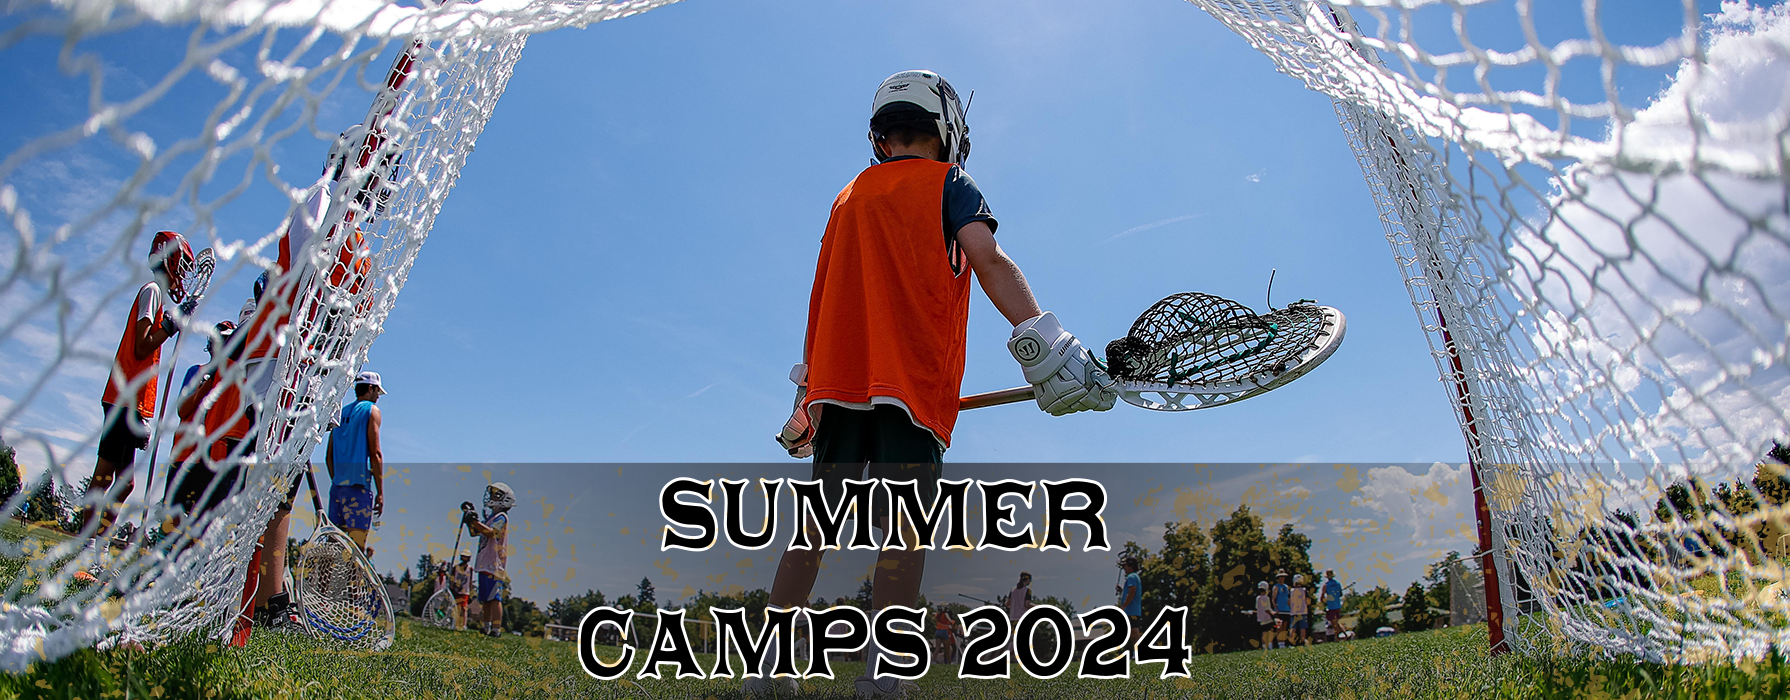 Camps 2024 Promo 3.png